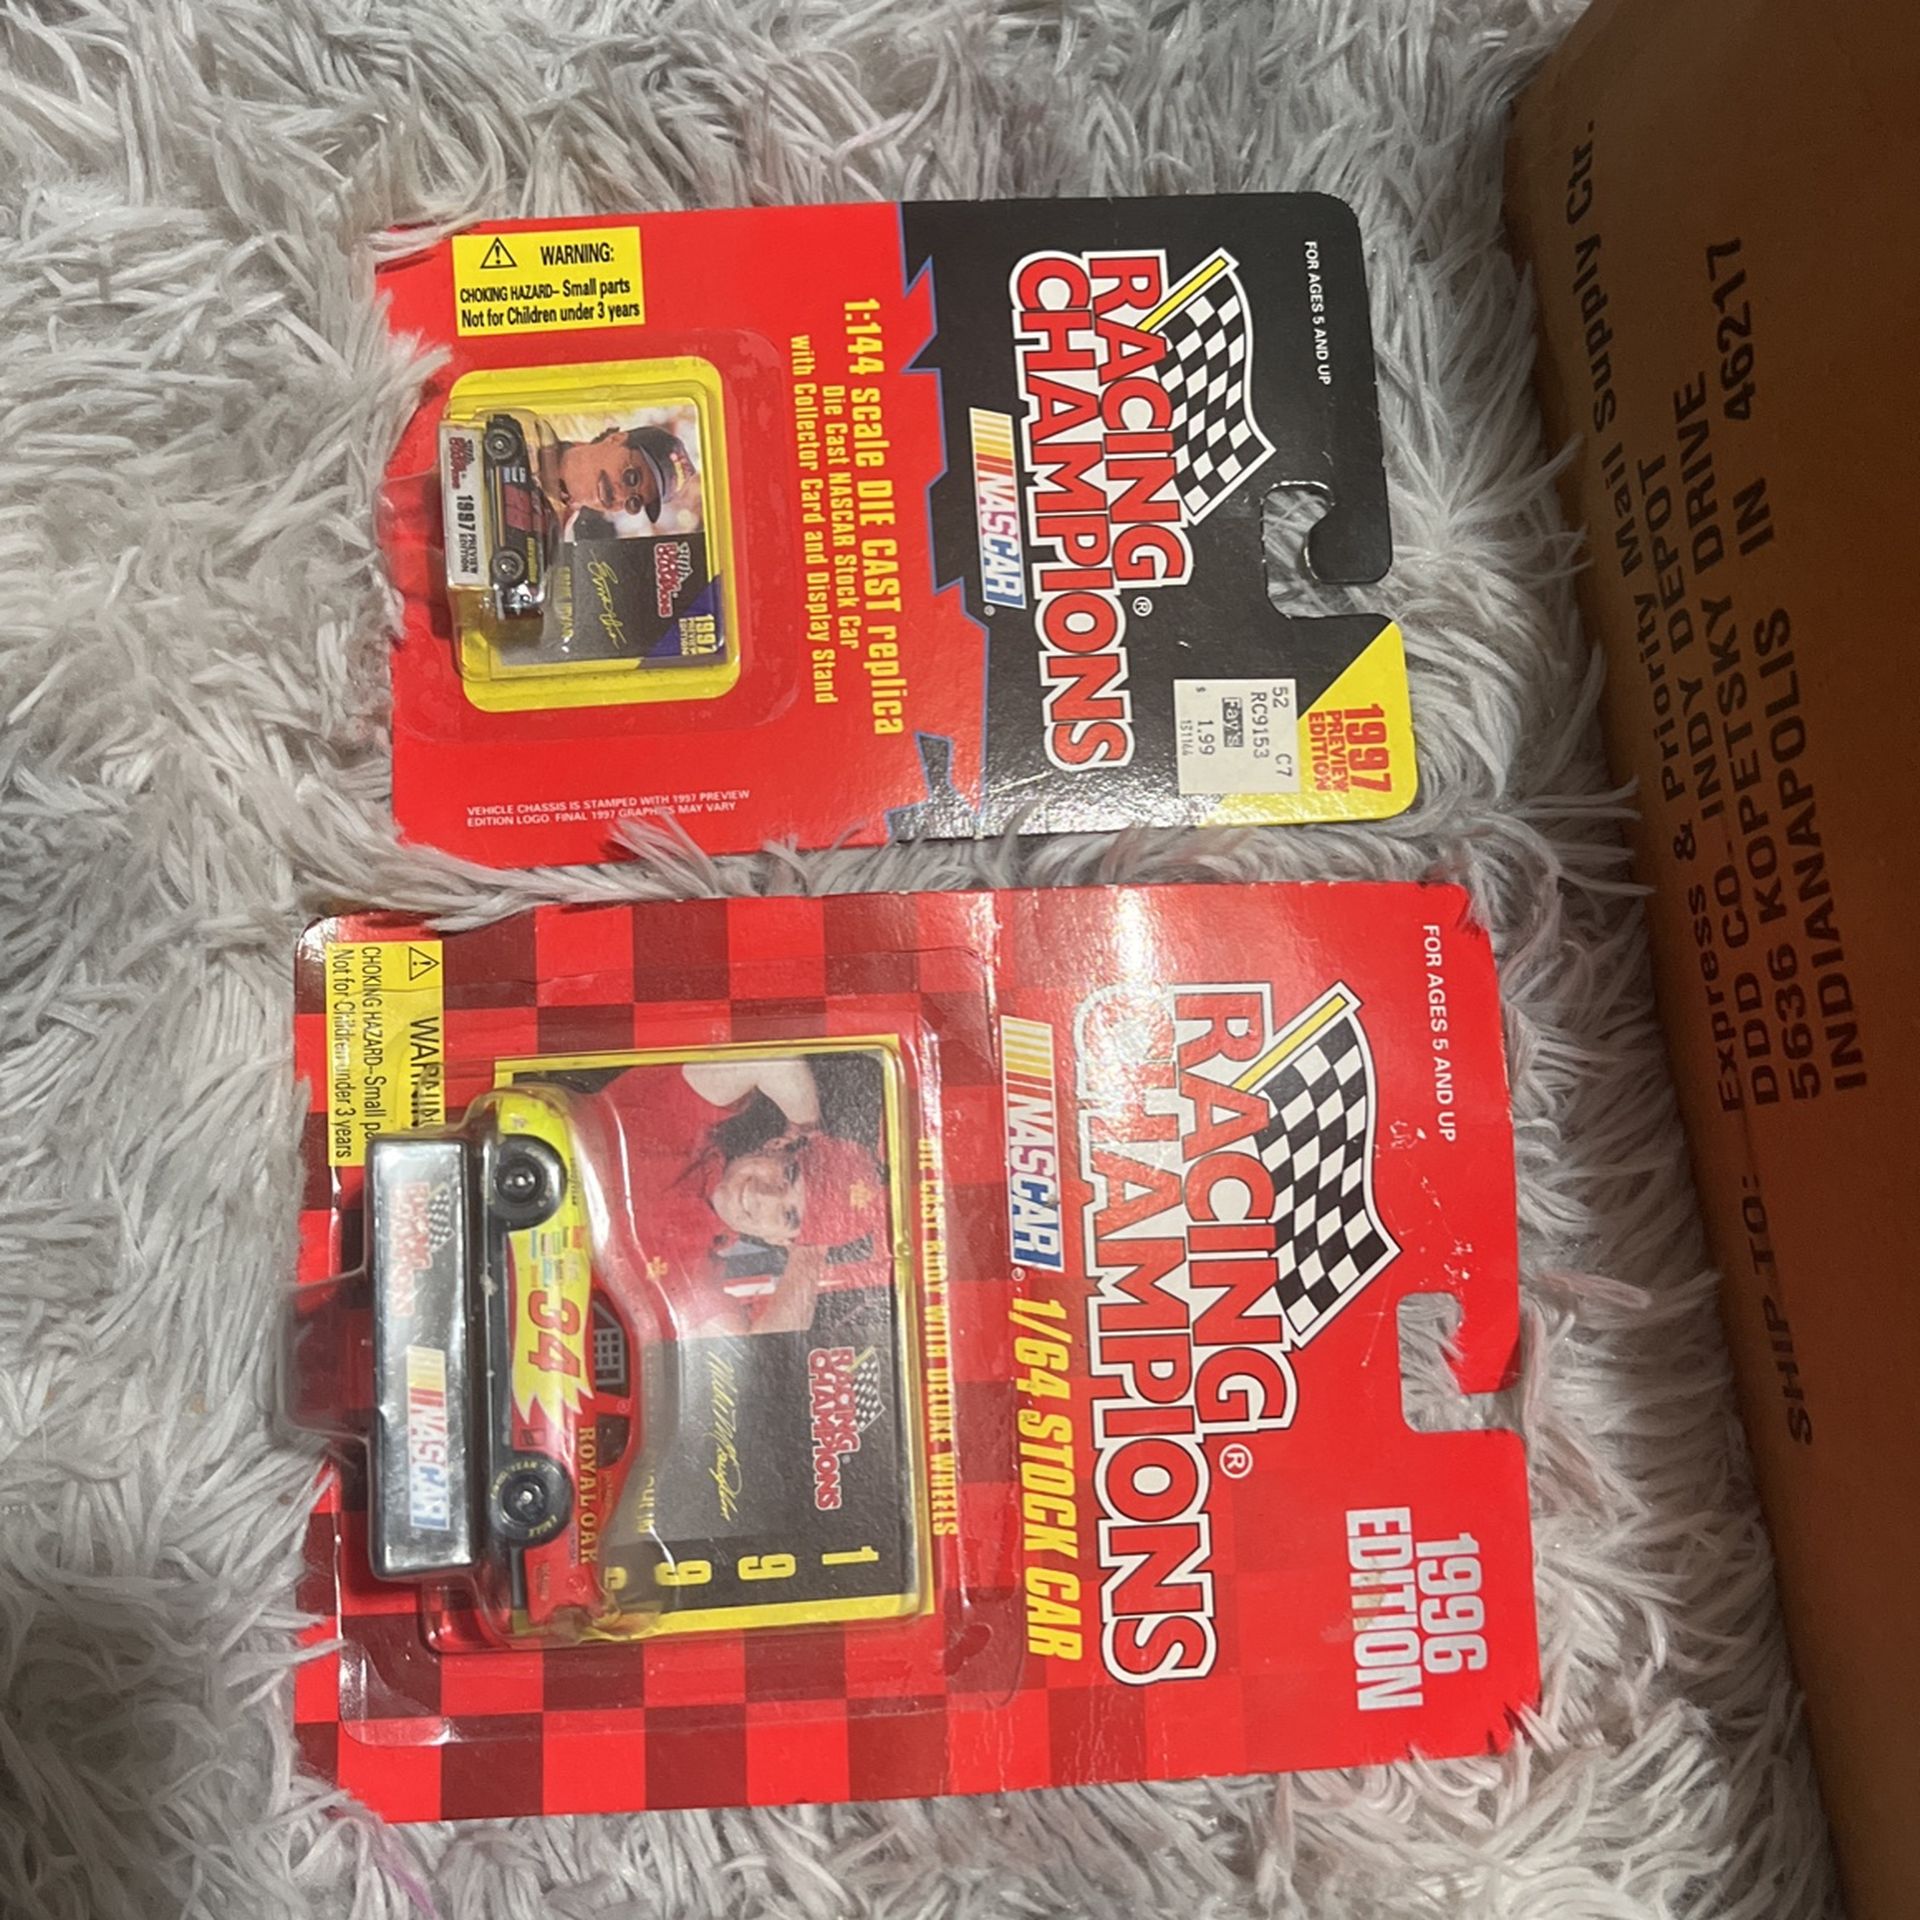 NASCAR Collectible Cars From 1(contact info removed)